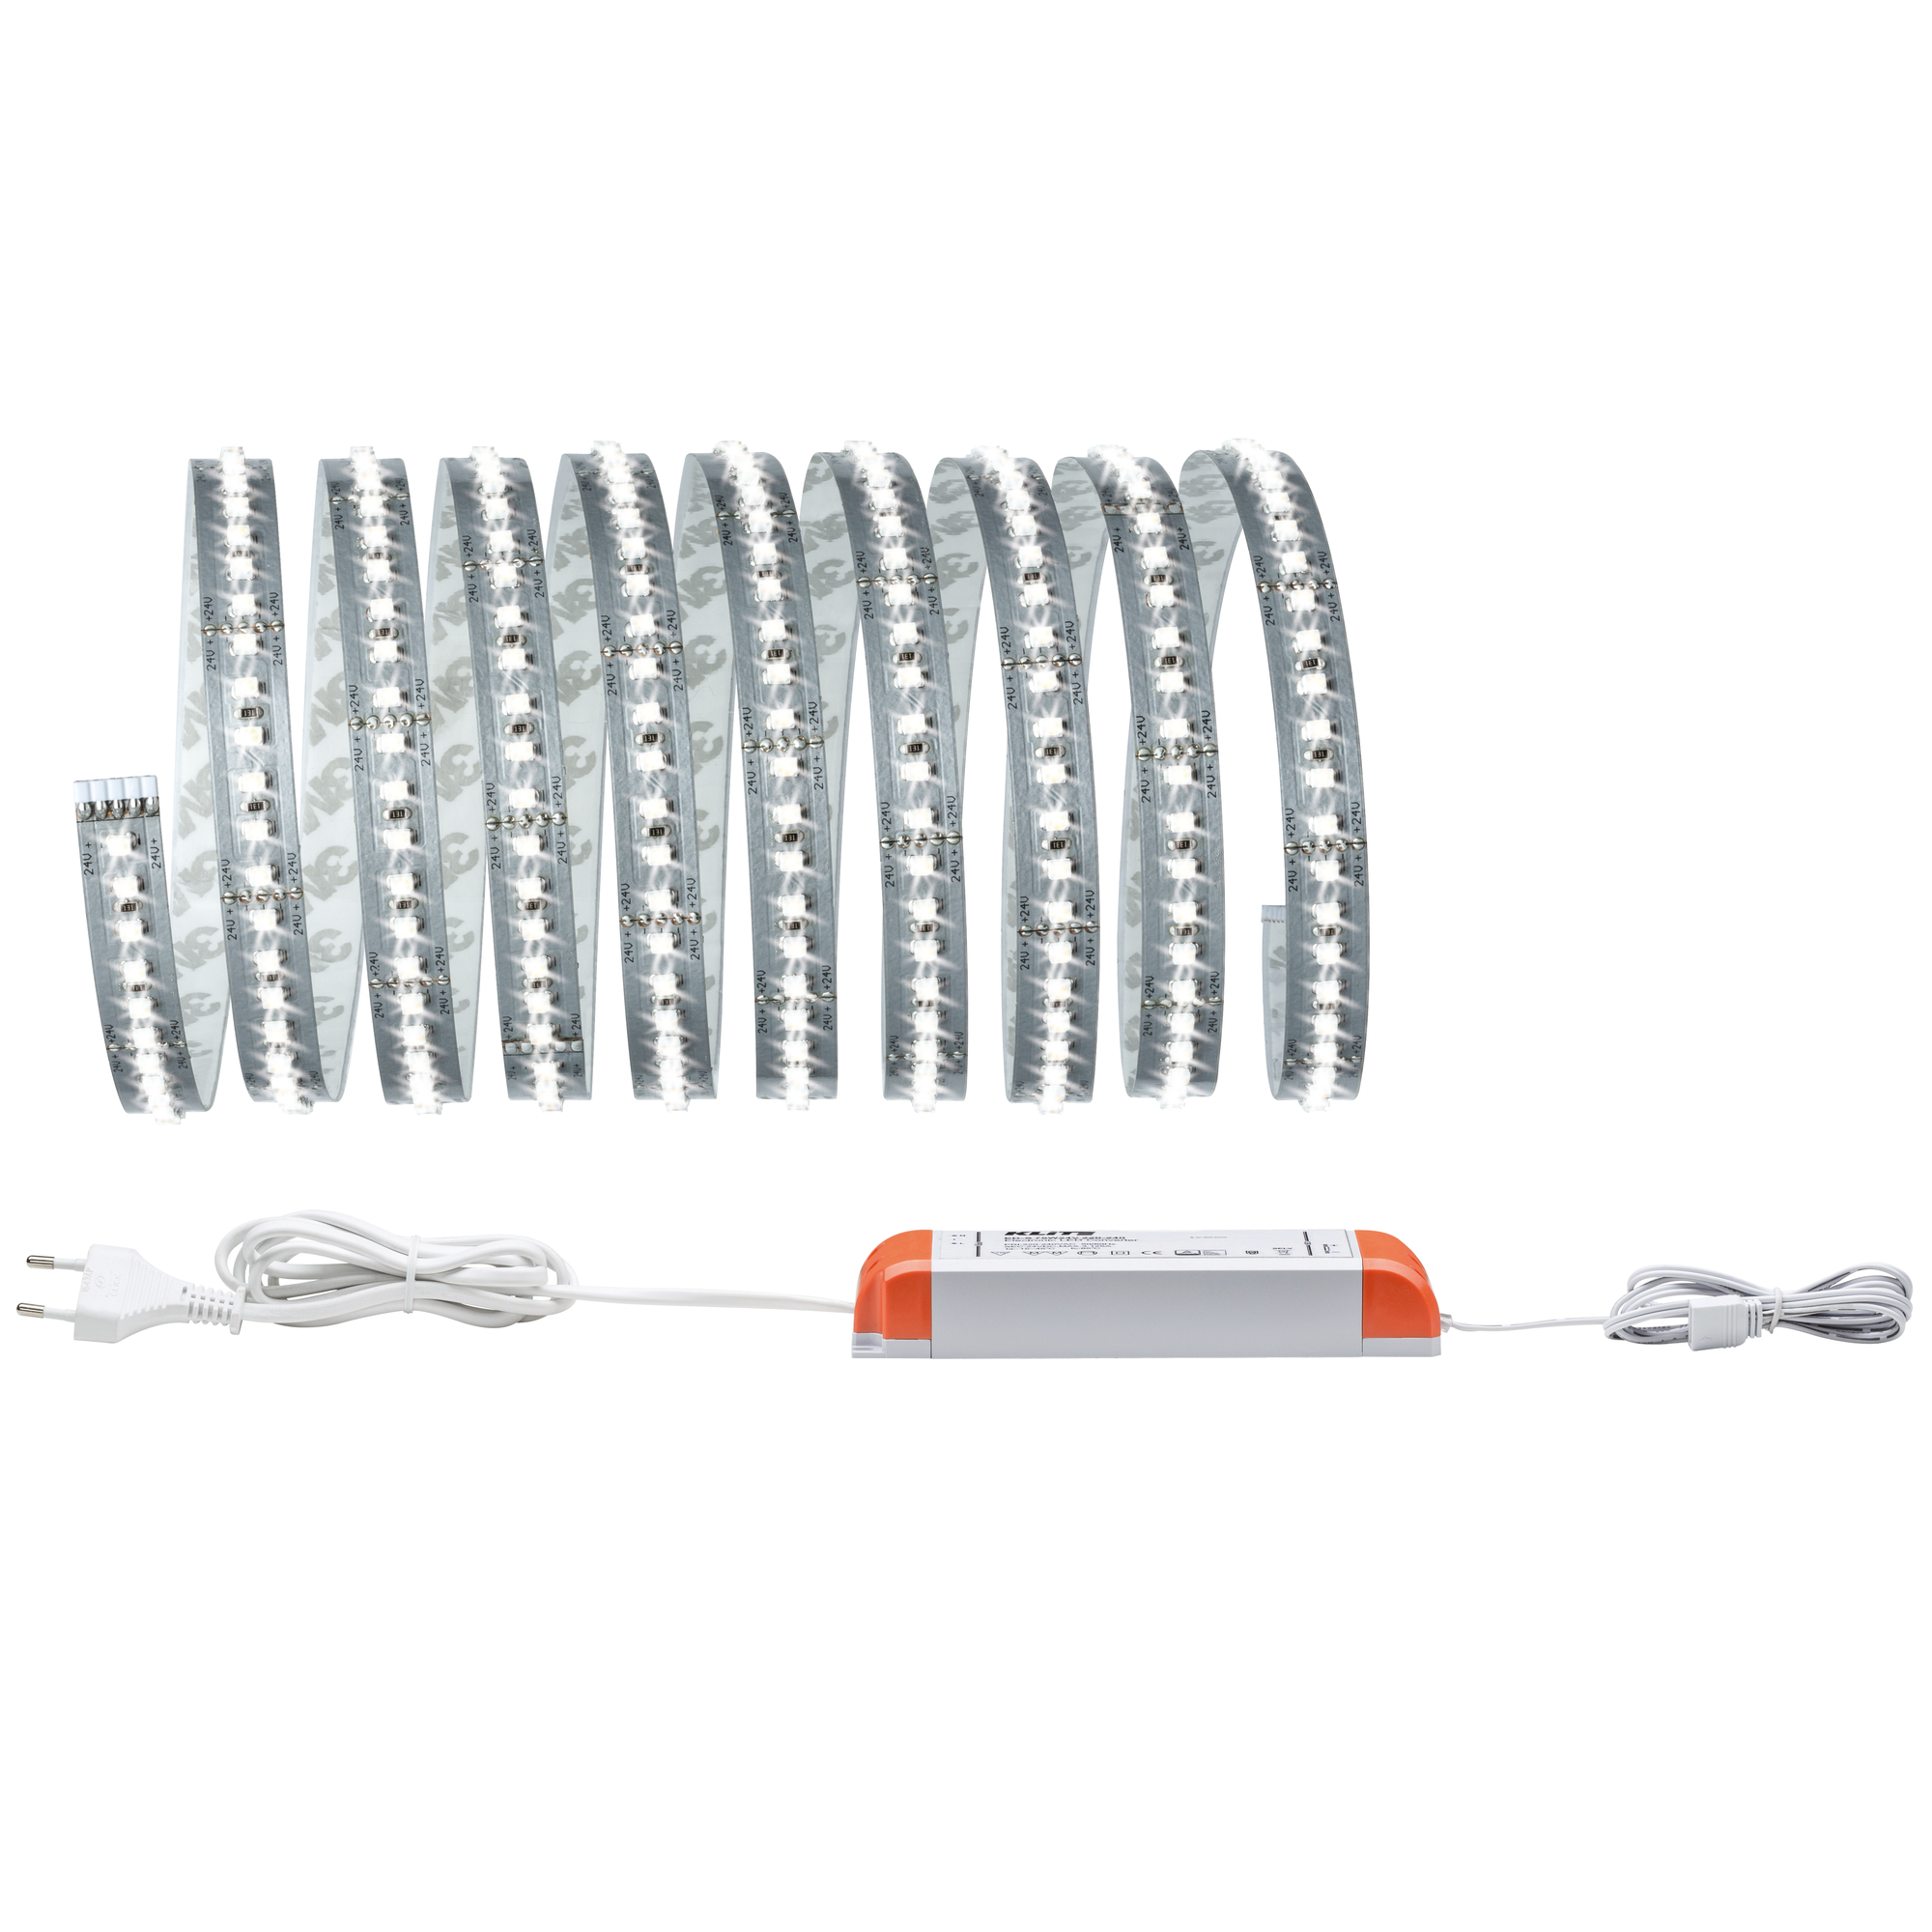 Function MaxLED 1000 Basisset 3m Tageslichtweiß 34 W 230/24 V 60 VA Silber + product picture